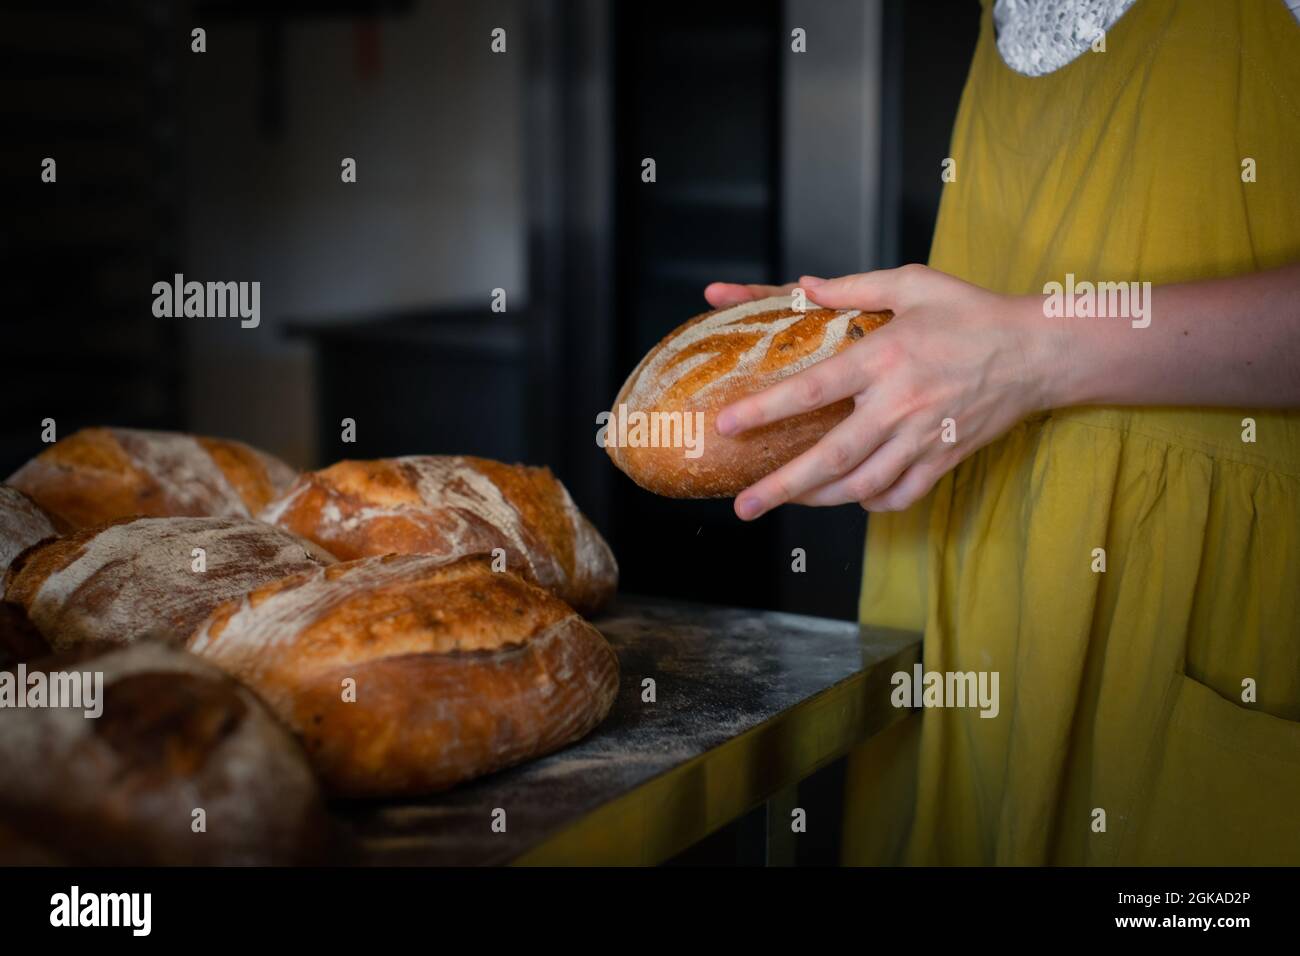 https://c8.alamy.com/comp/2GKAD2P/girl-baker-holding-a-loaf-of-bread-in-her-hands-2GKAD2P.jpg